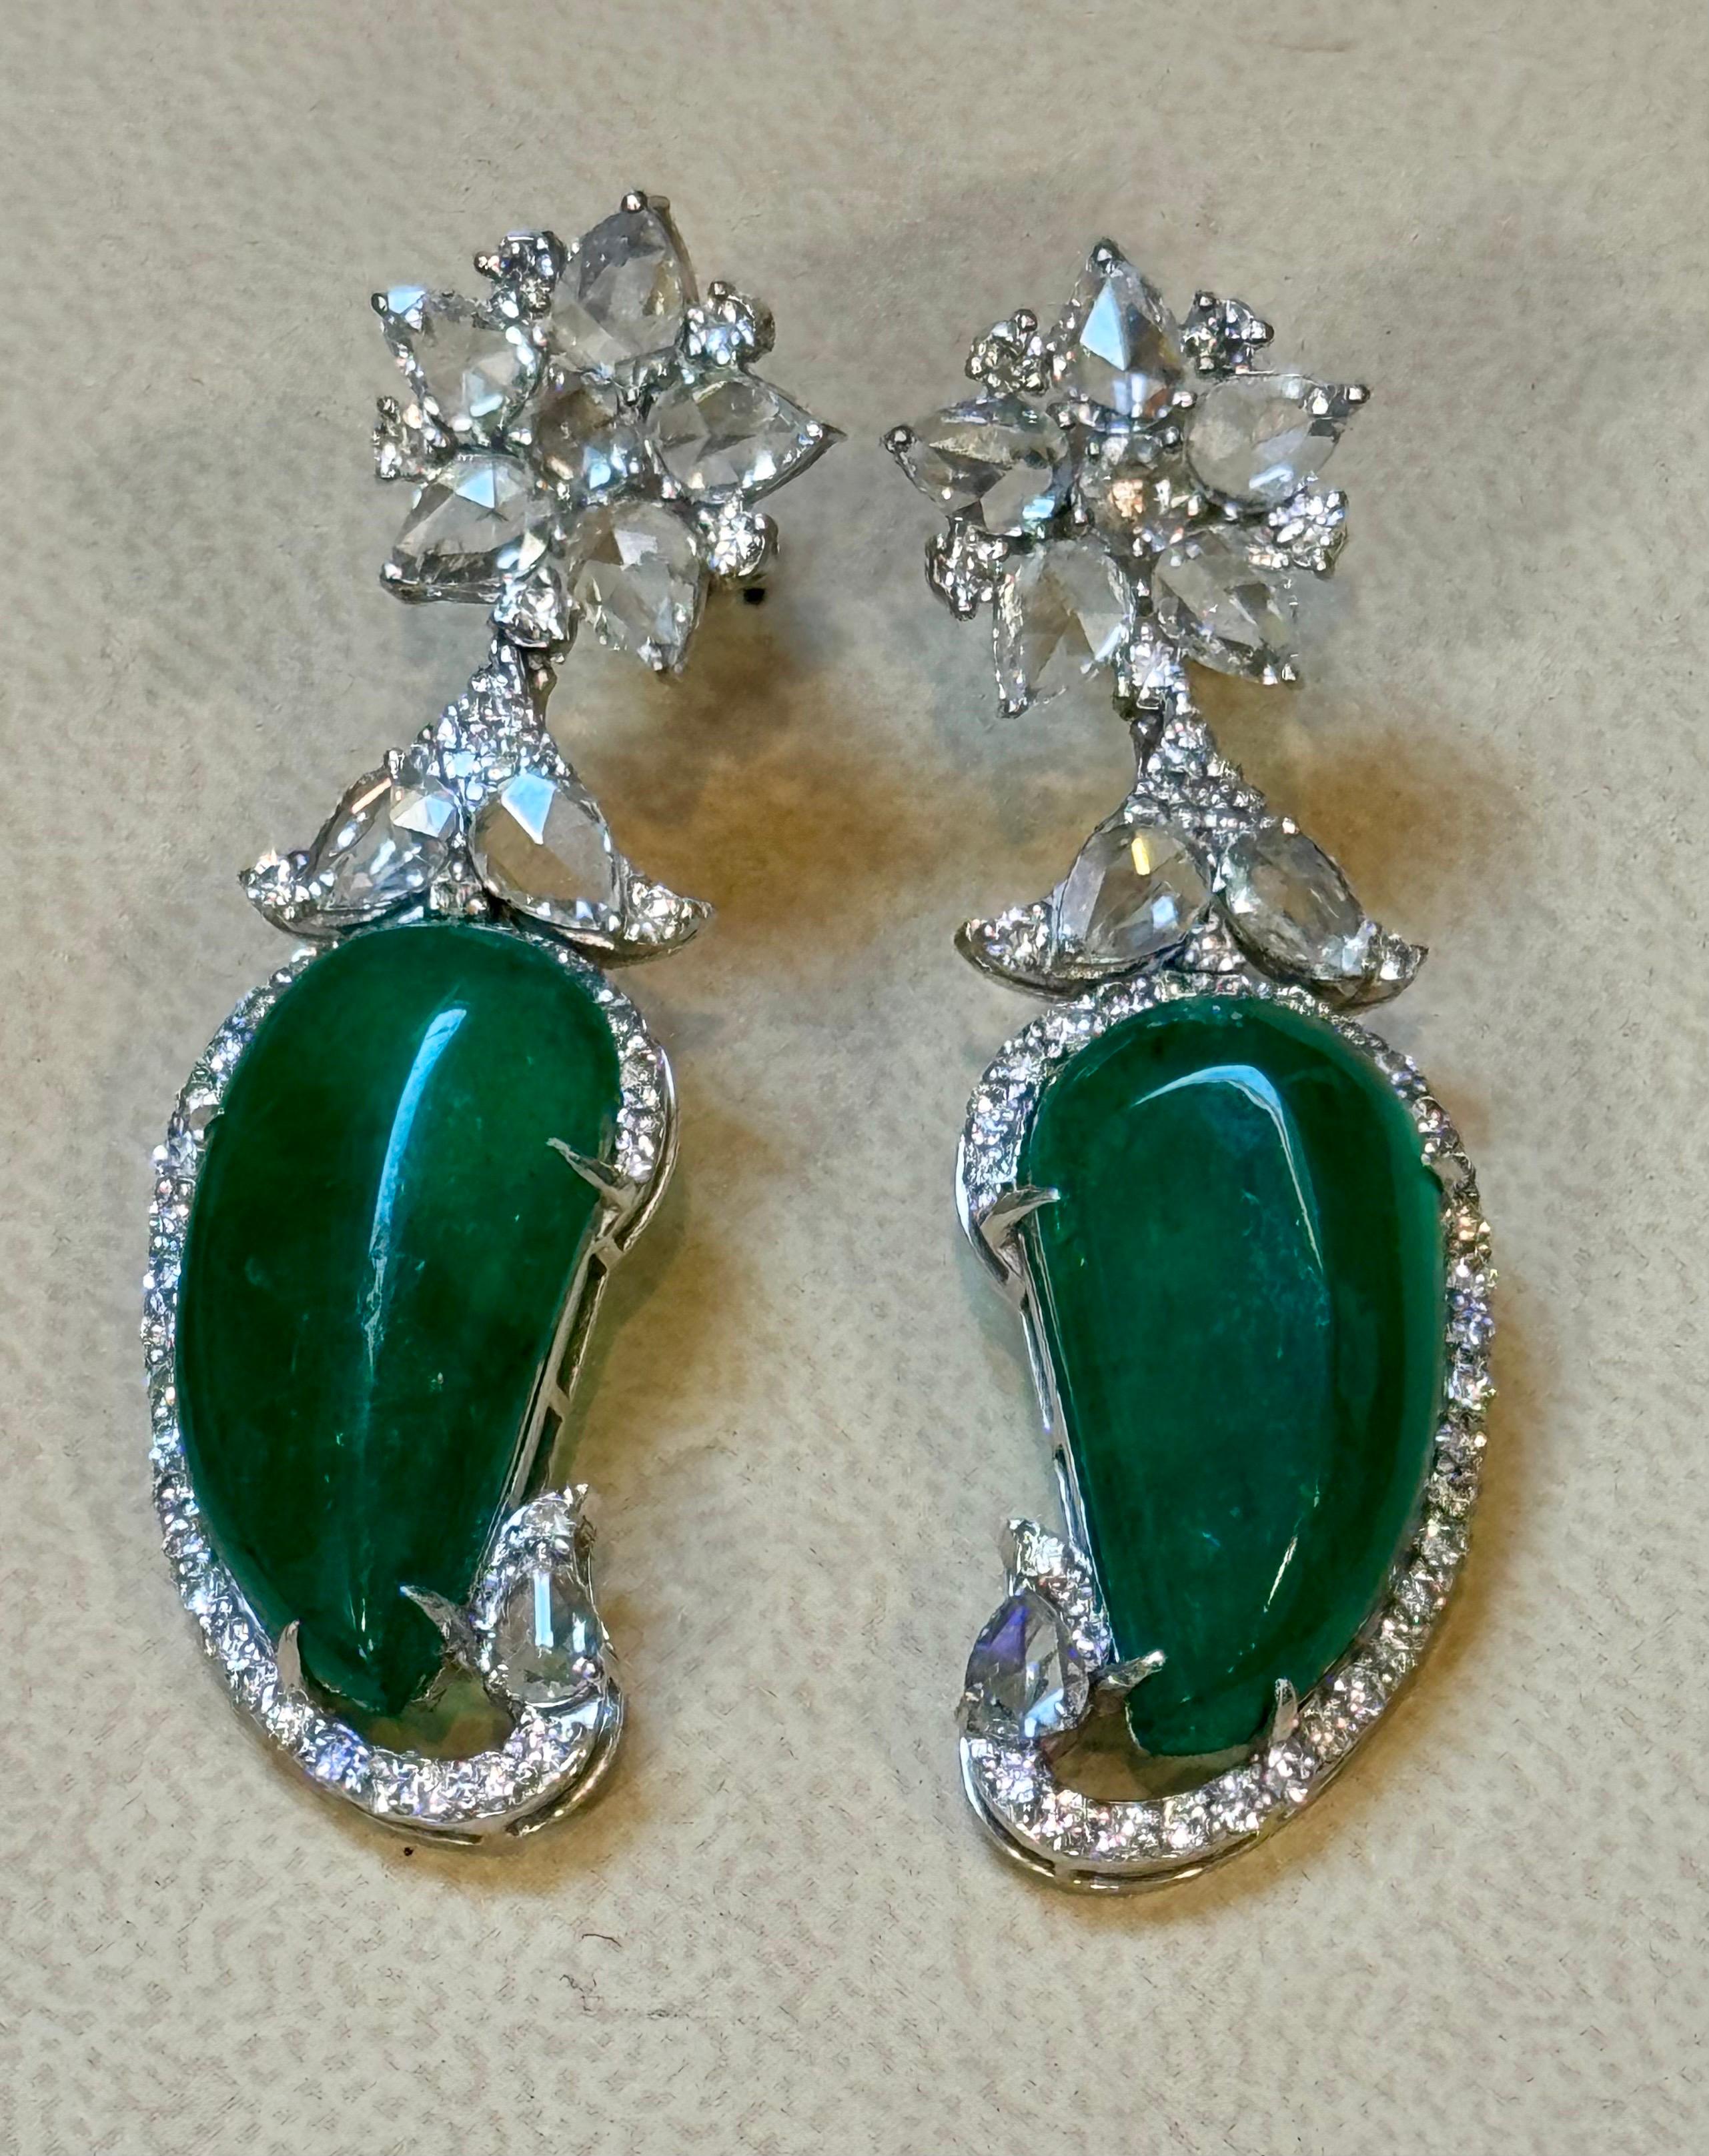 20 Ct Fine Emerald Cabochon & 4 Ct Rose Cut Diamond  18 Kt White Gold  Earrings For Sale 6